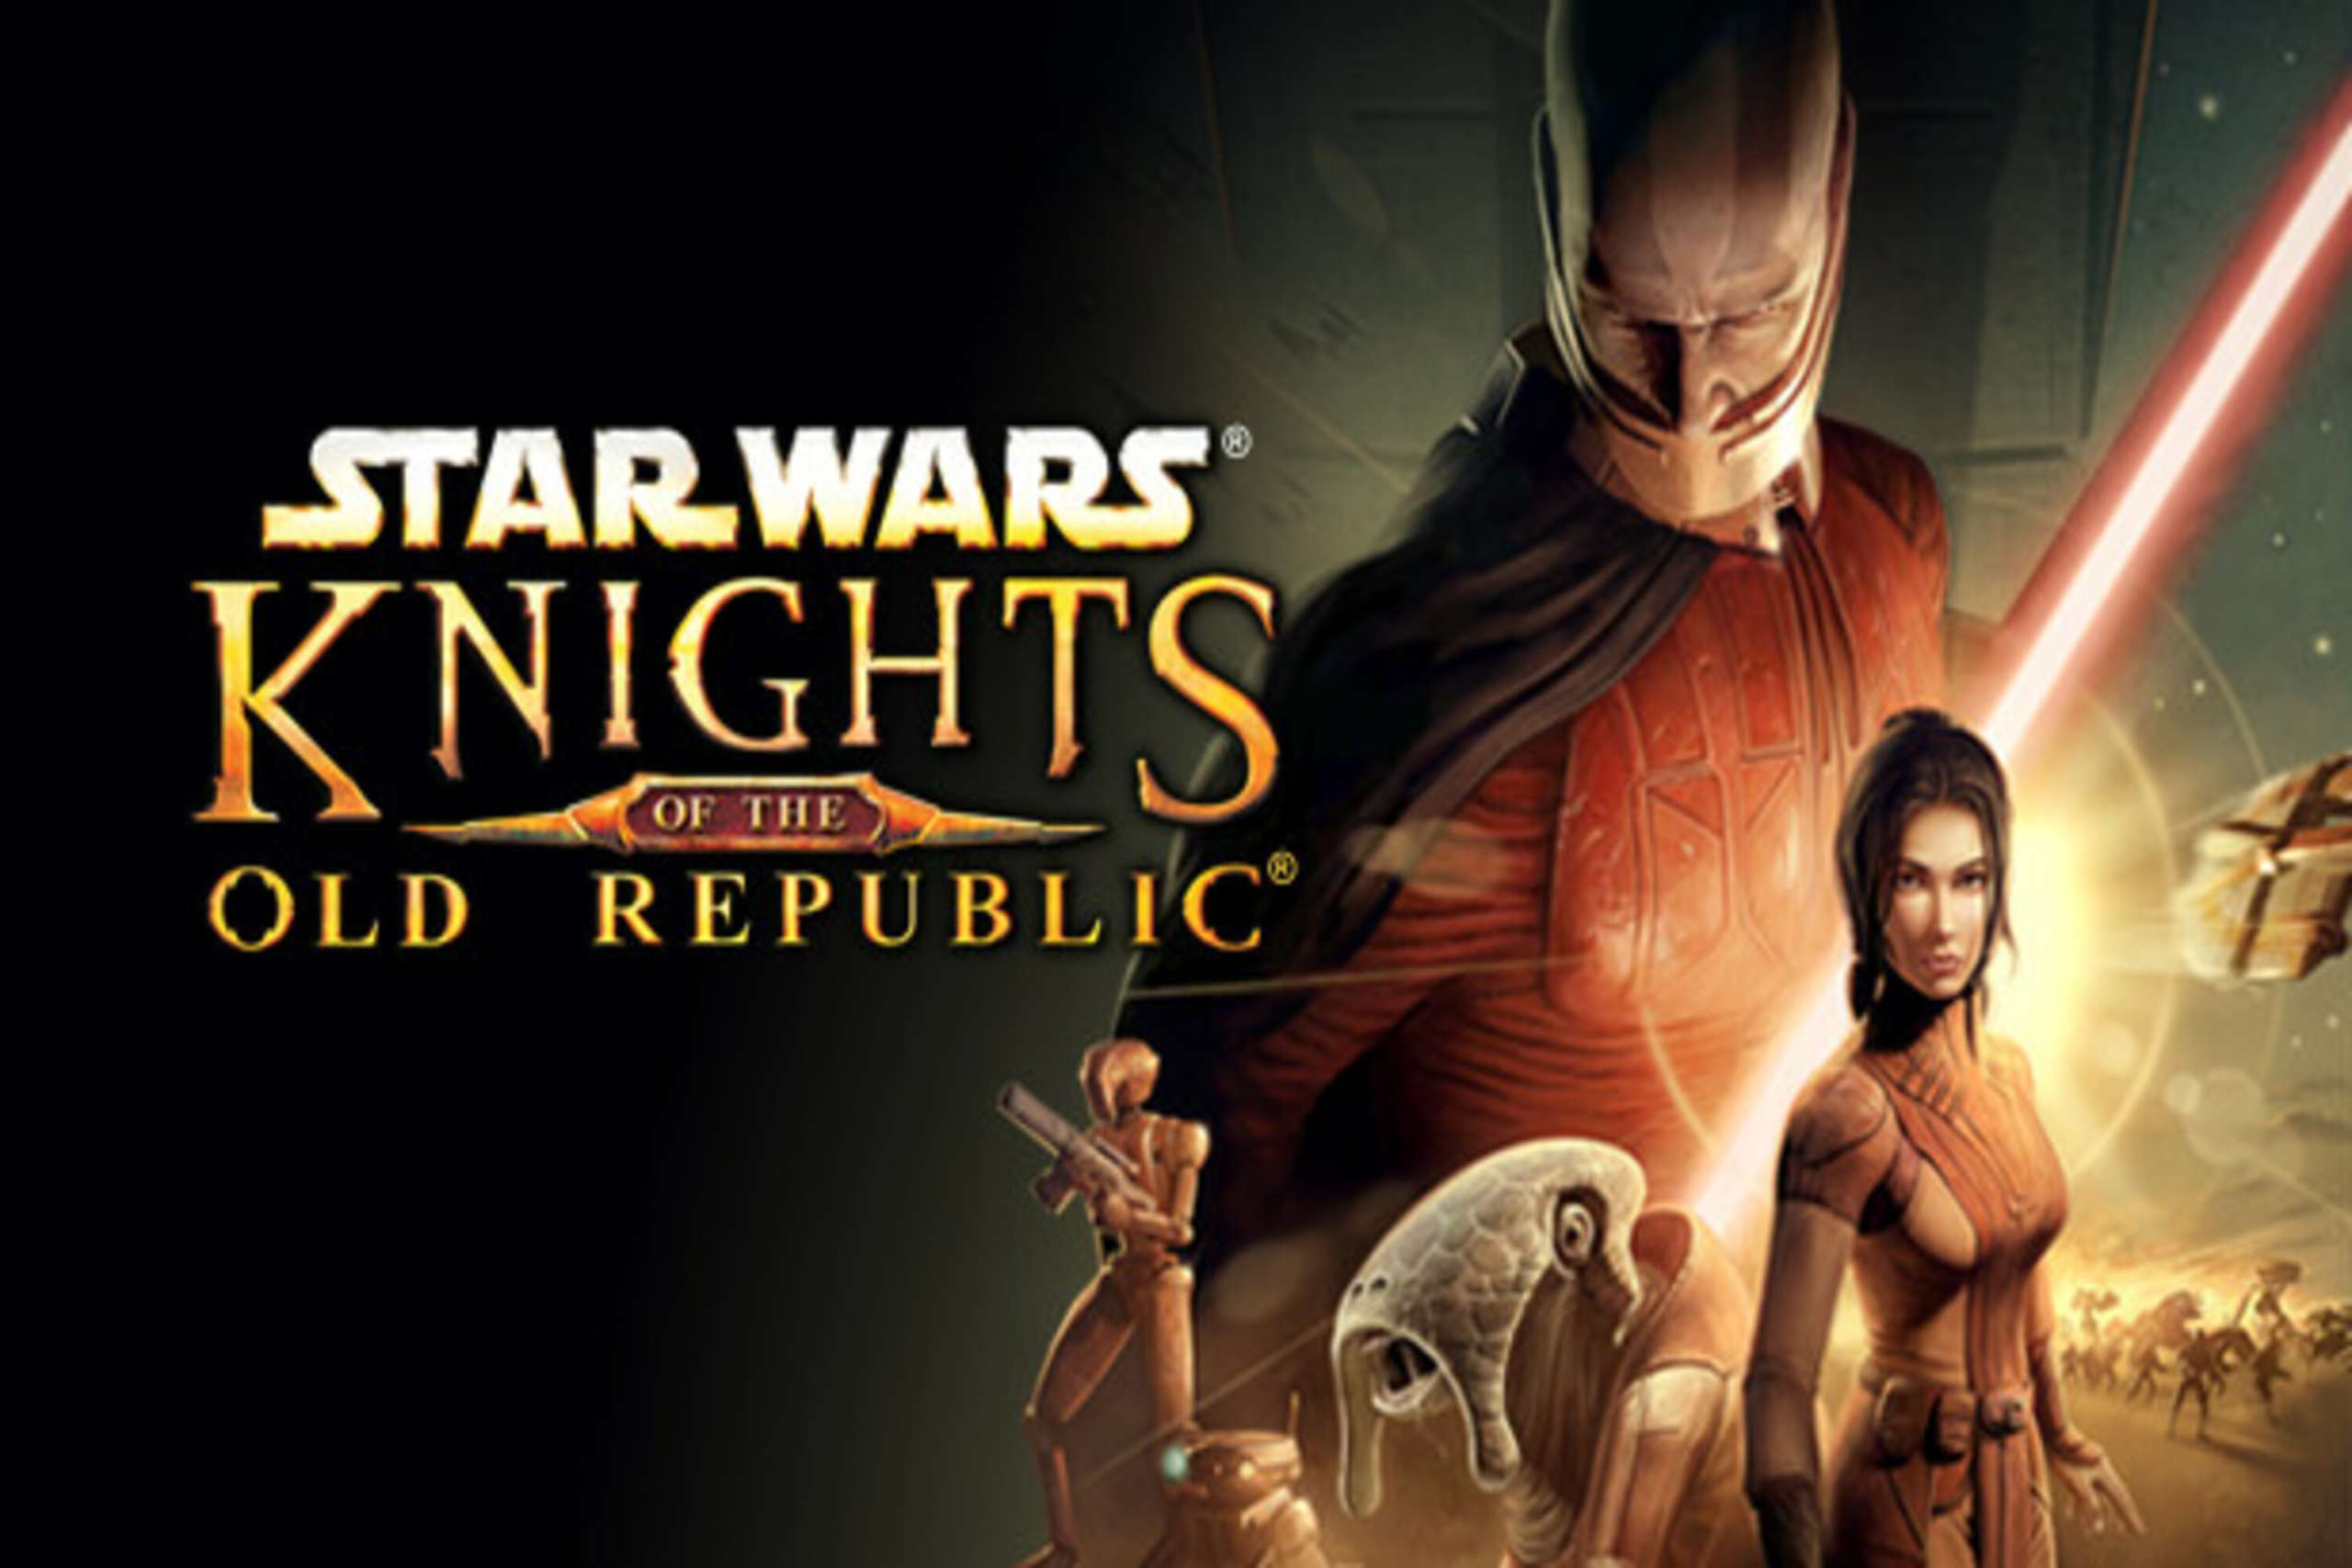 Star wars the knight of the old republic русификатор steam фото 65